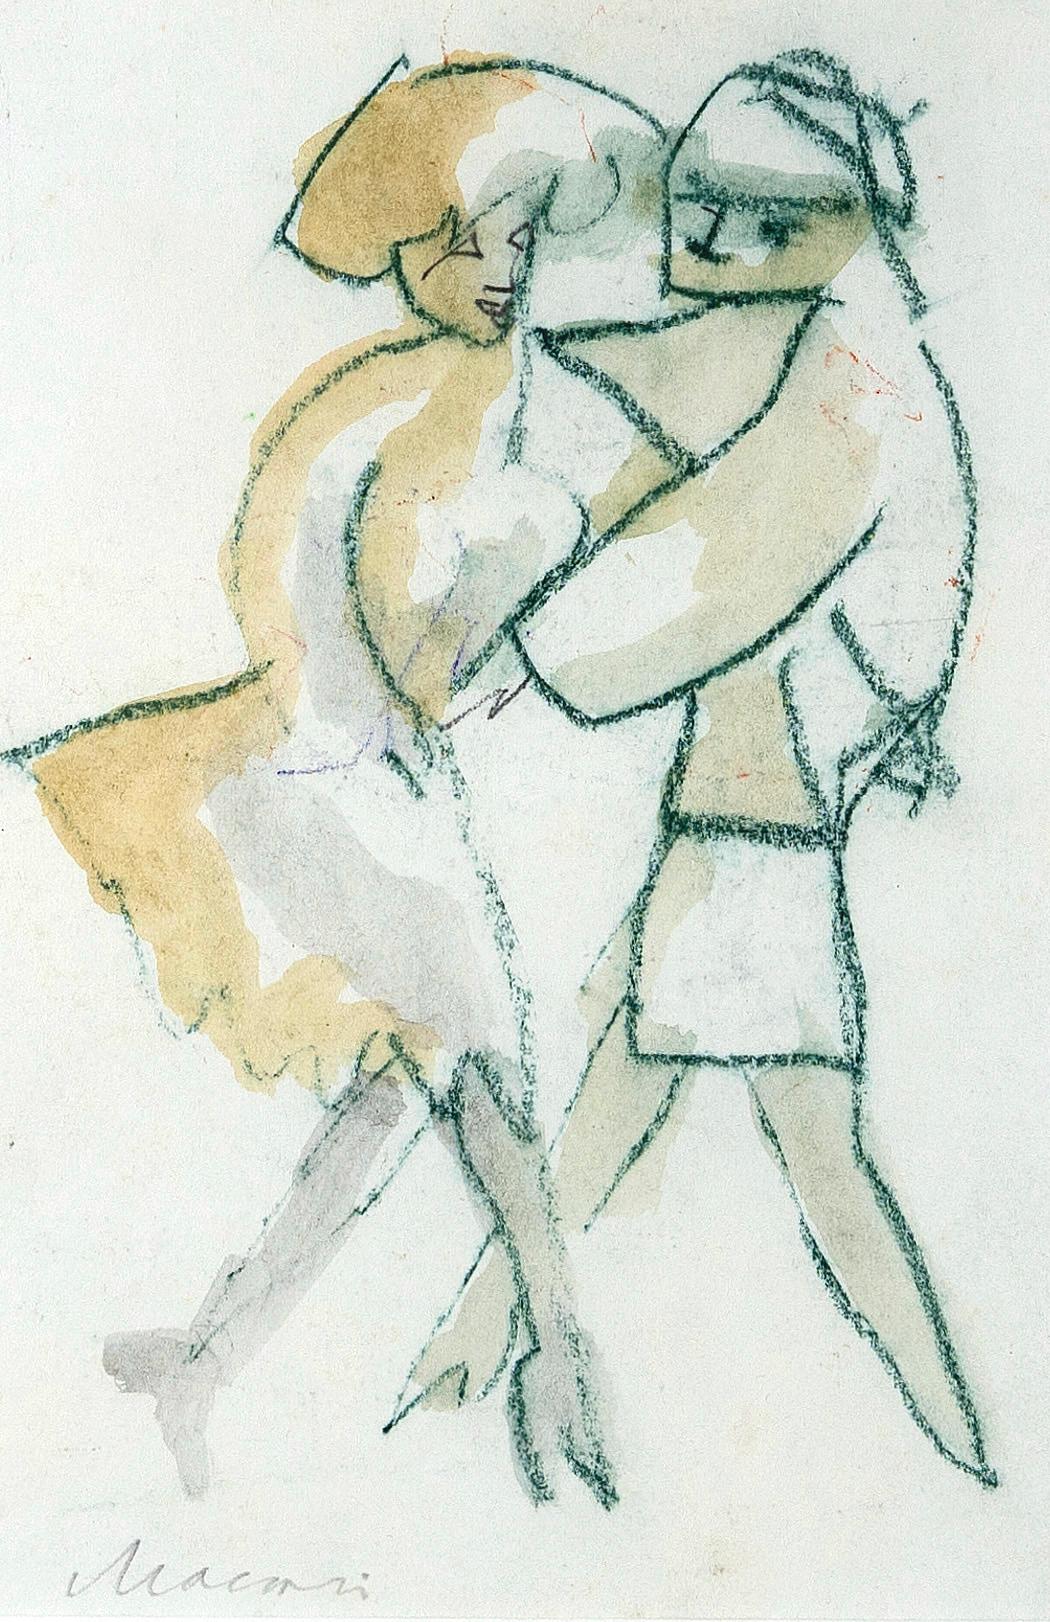 Dancers is an original modern artwork realized in the early 1980s by the Italian artist Mino Maccari (Siena, 1898 - Rome, 1989).

Original Colored Watercolors and oil pastels on Paper.

Hand-signed in pencil by the artist on the lower margin: